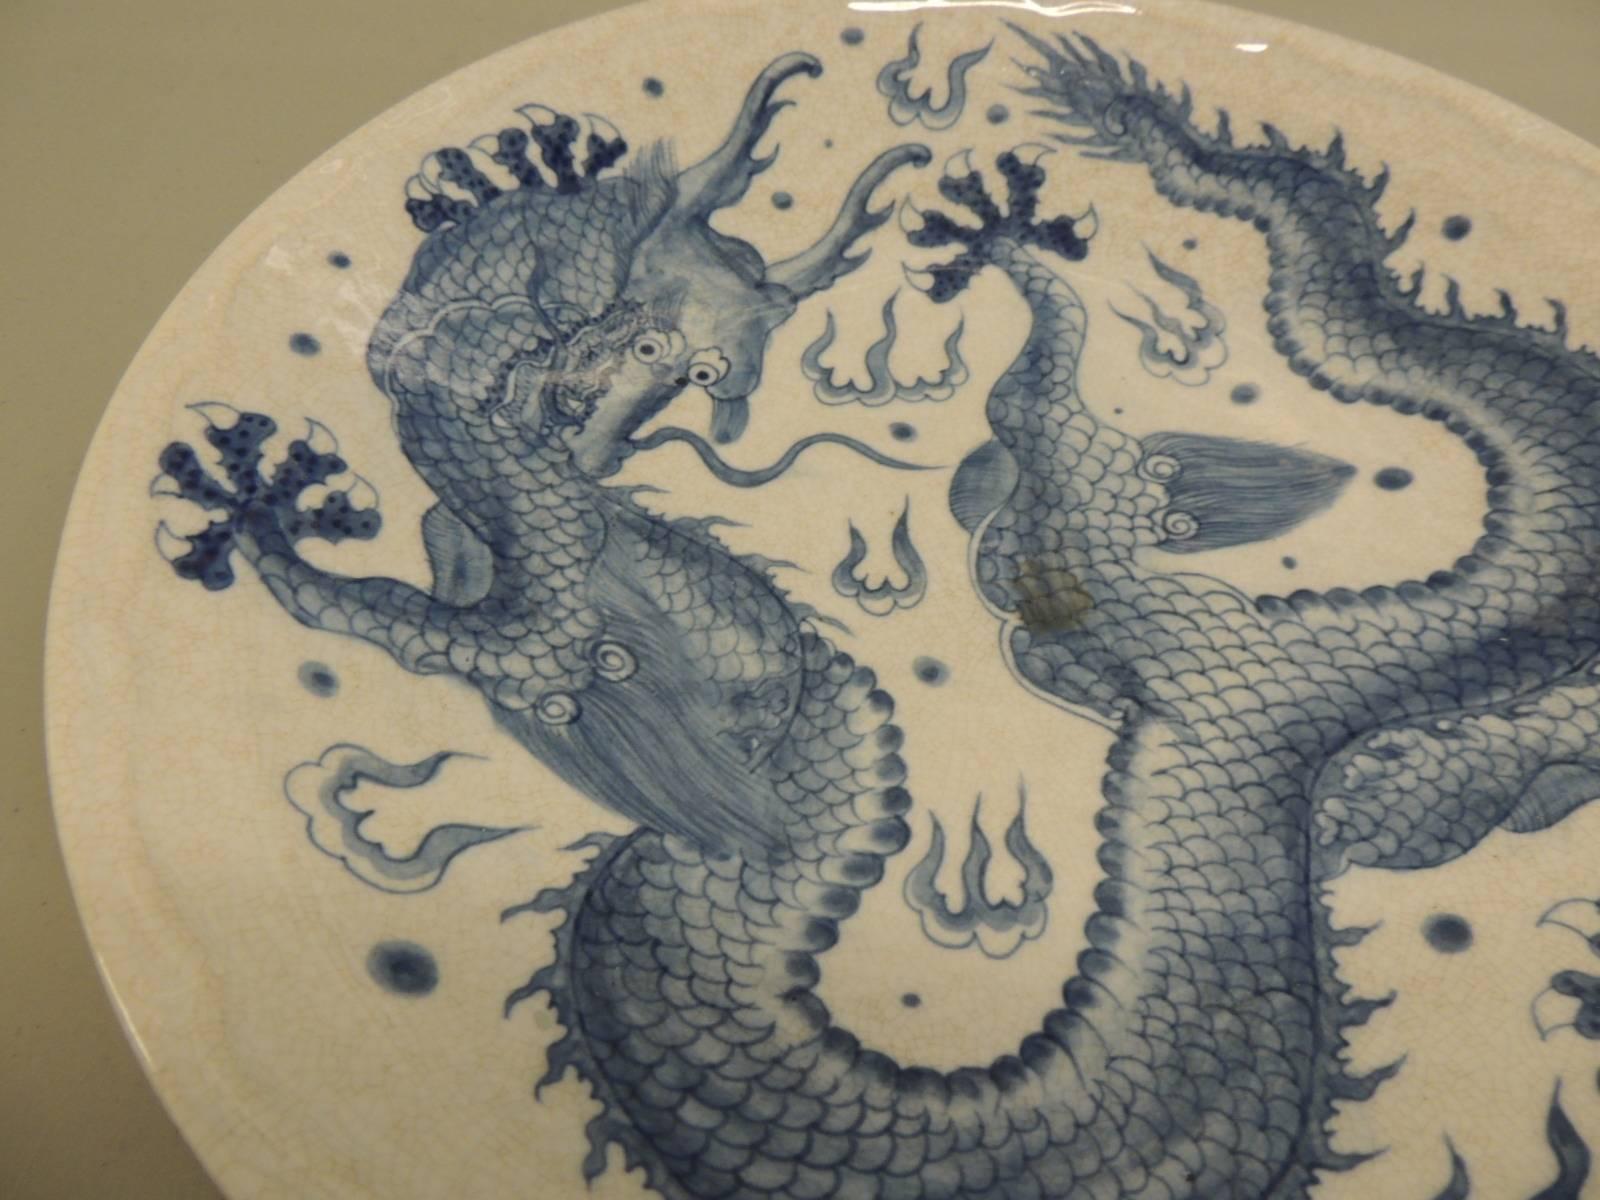 Chinese Export Large Vintage Asian Crackle Wear Blue and White Dragon Ceramic Serving Bowl